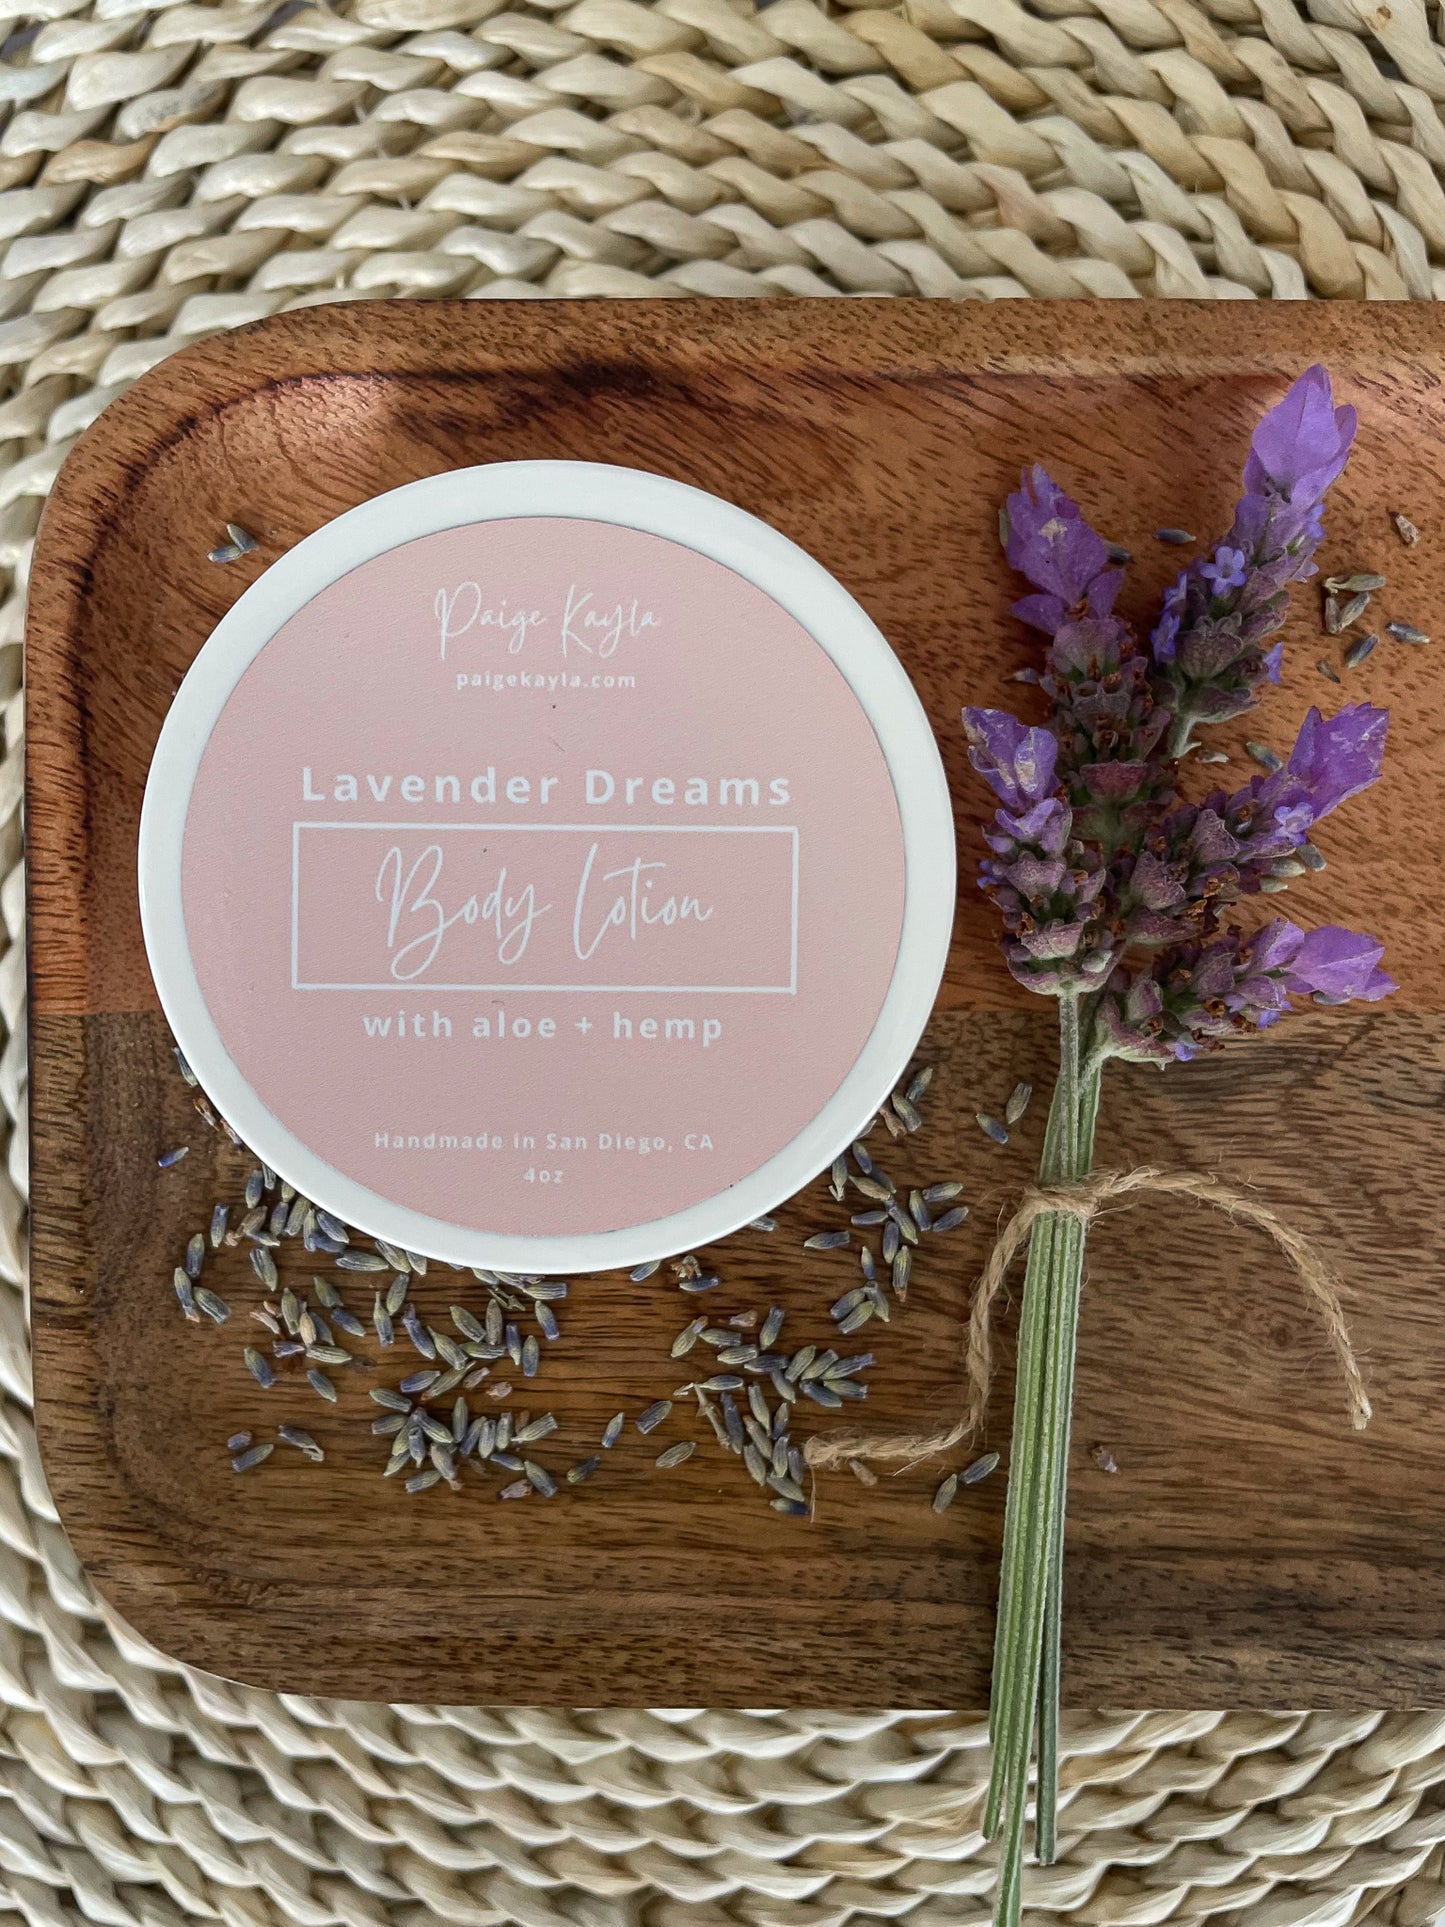 Lavender Dreams Body Lotion (Summer Butter)